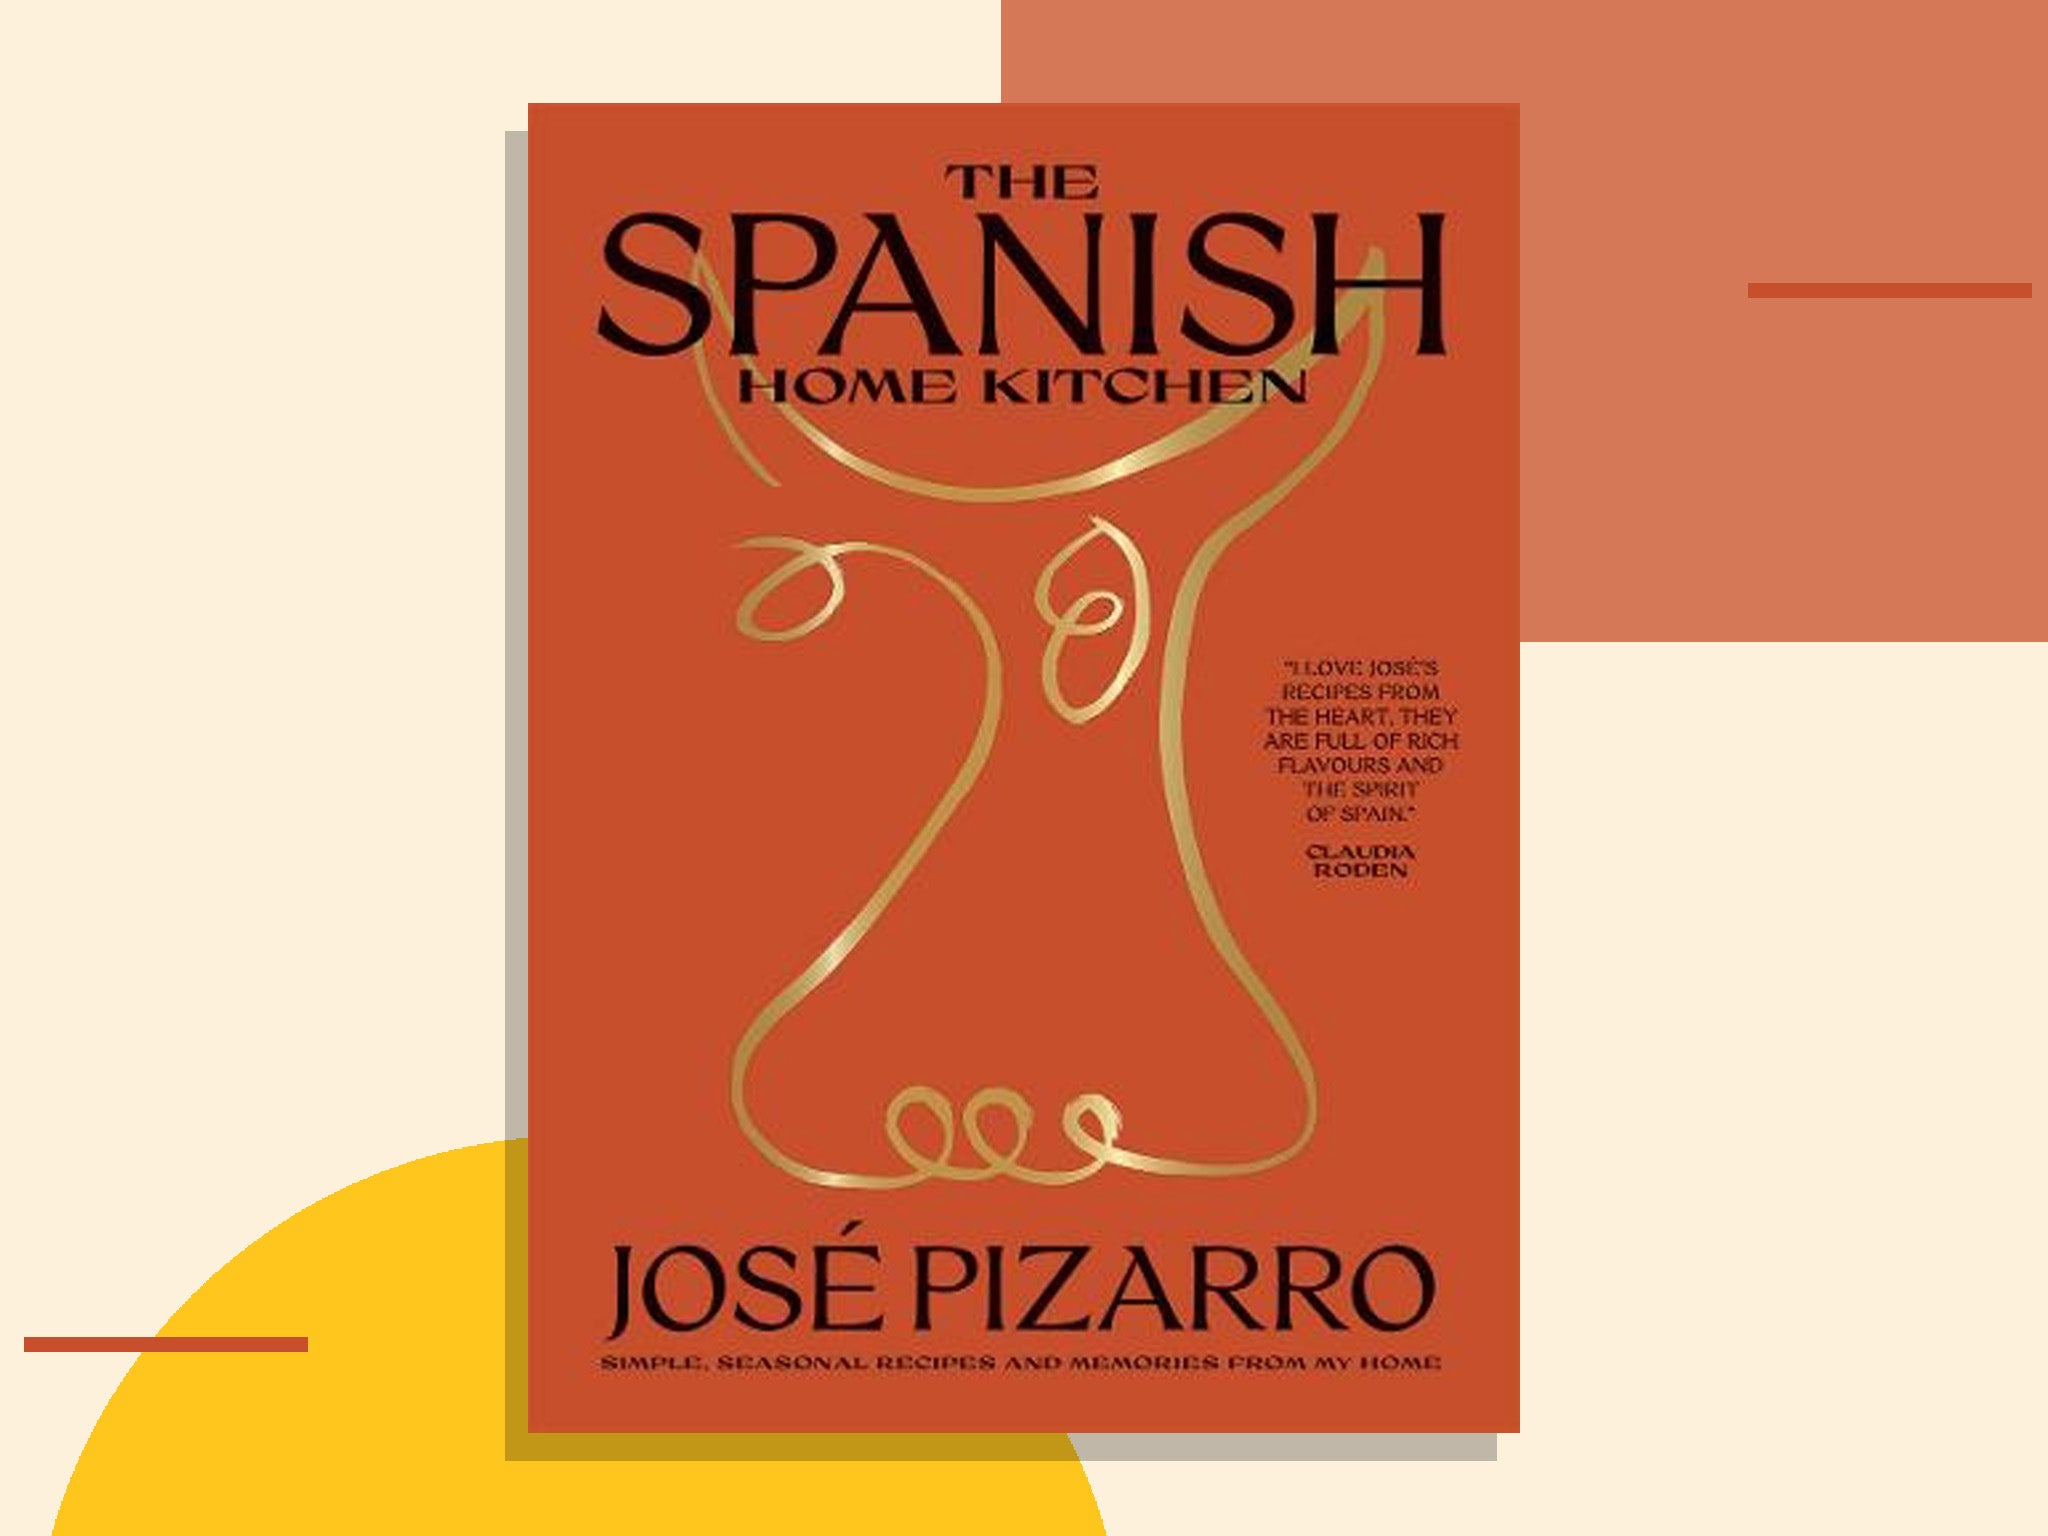 Jose Pizarros The Spanish Home Kitchen cookbook review Home is most certainly where the food is The Independent picture